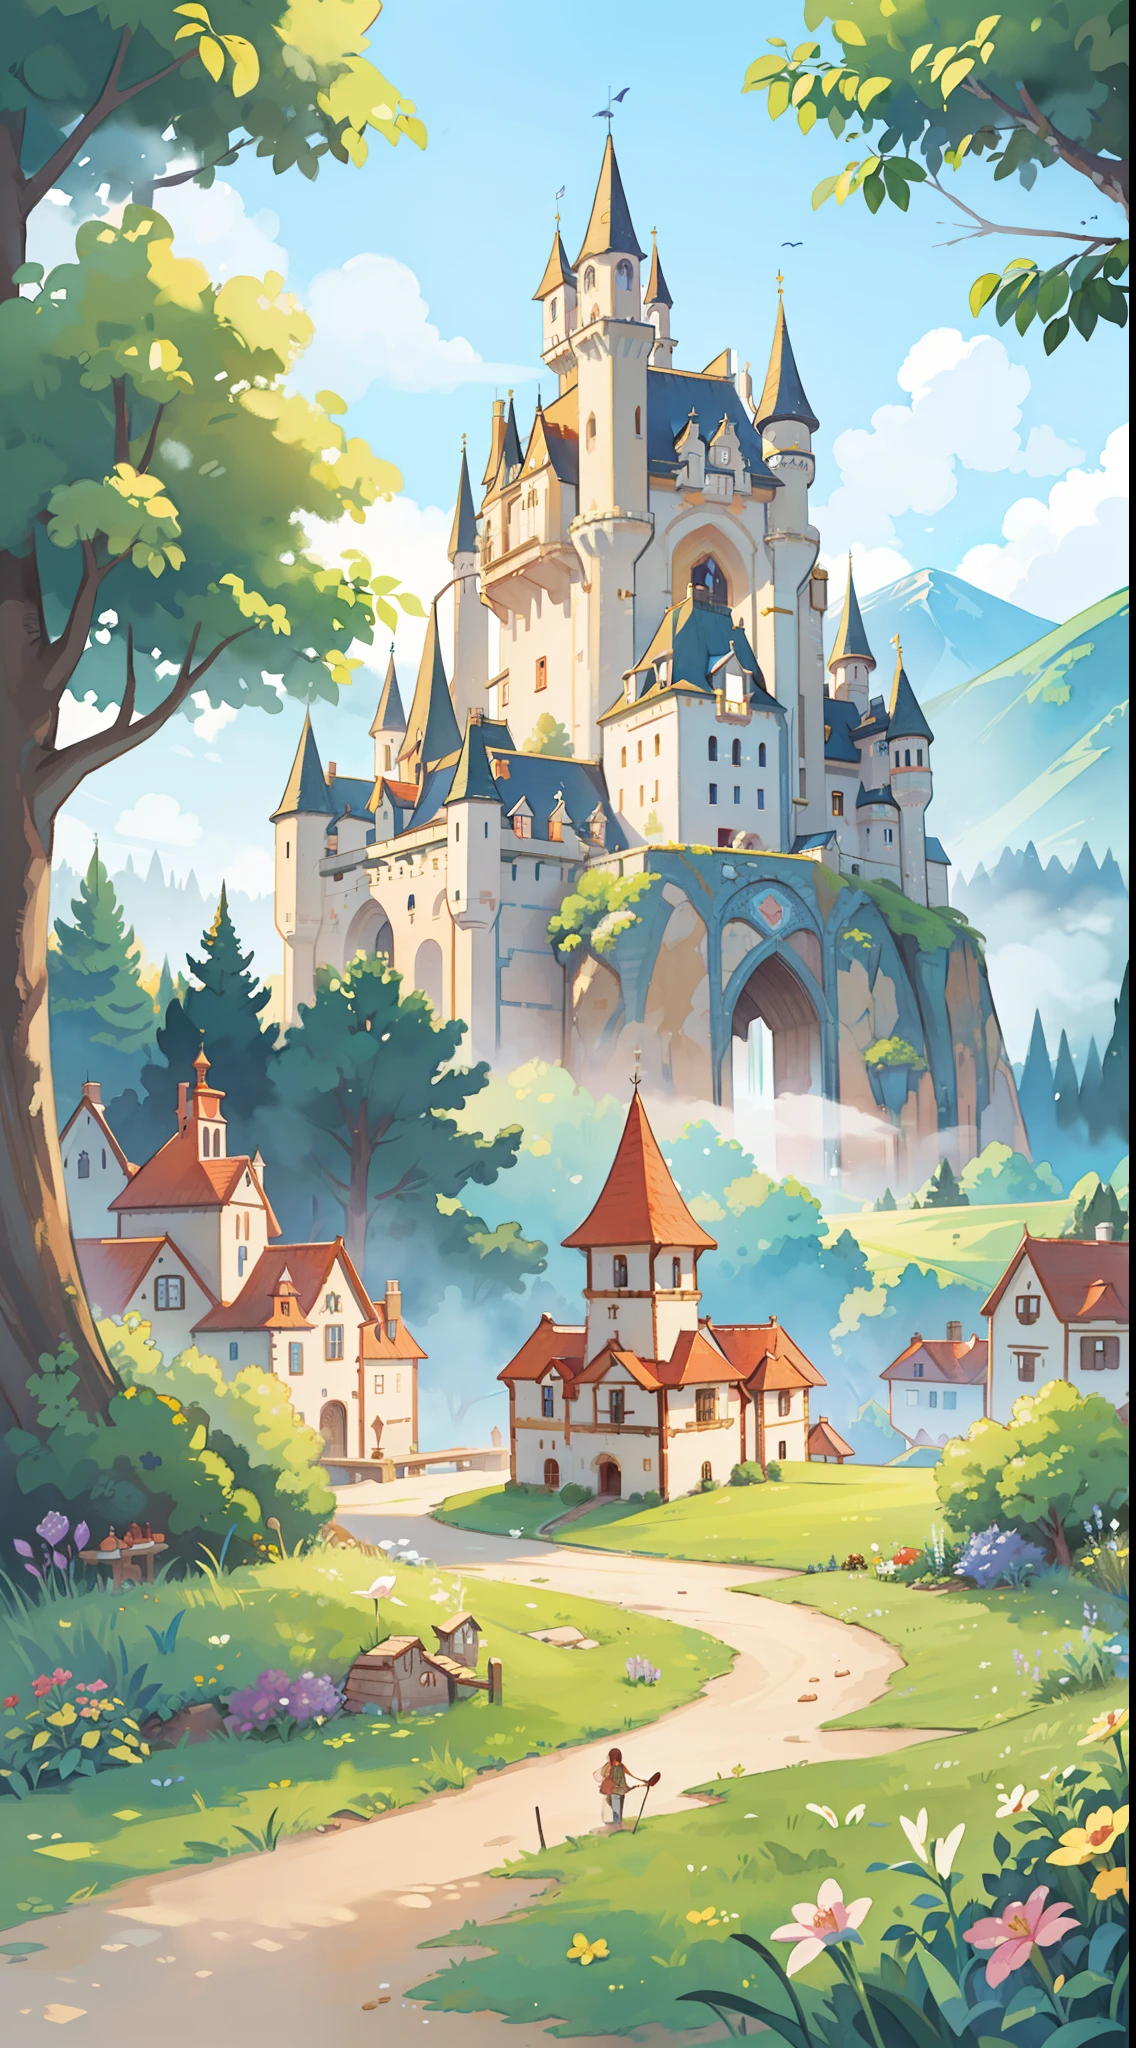 ((picture book illustration)), fantasy landscape, watercolor illustration, whimsical, warm colors, fairytale castle and village, ((princess castle)), fairytale medieval style houses, ((masterpiece)), highly detailed environment